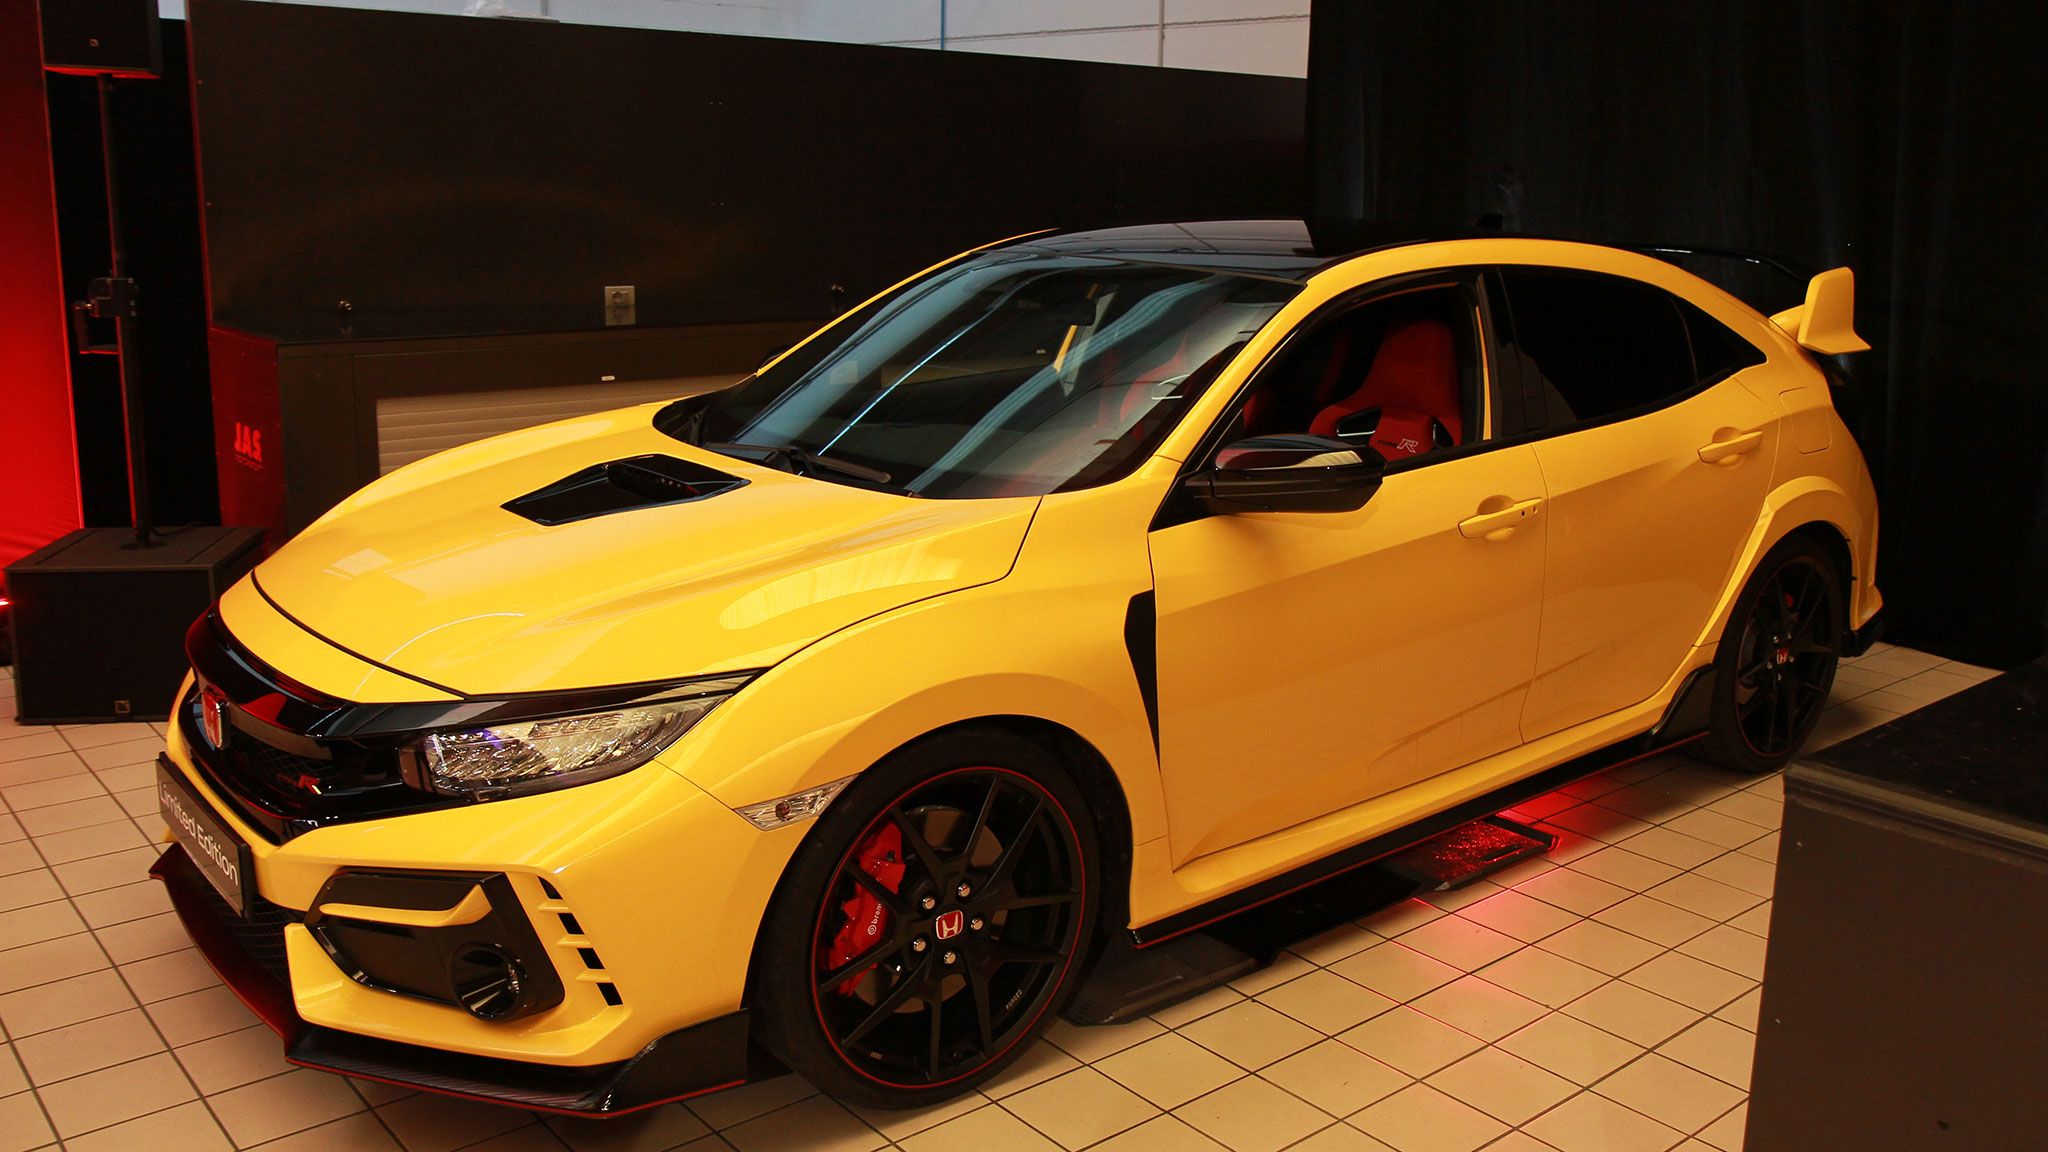 Honda Civic Type R Limited Edition First Look: Hot Gets Hotter